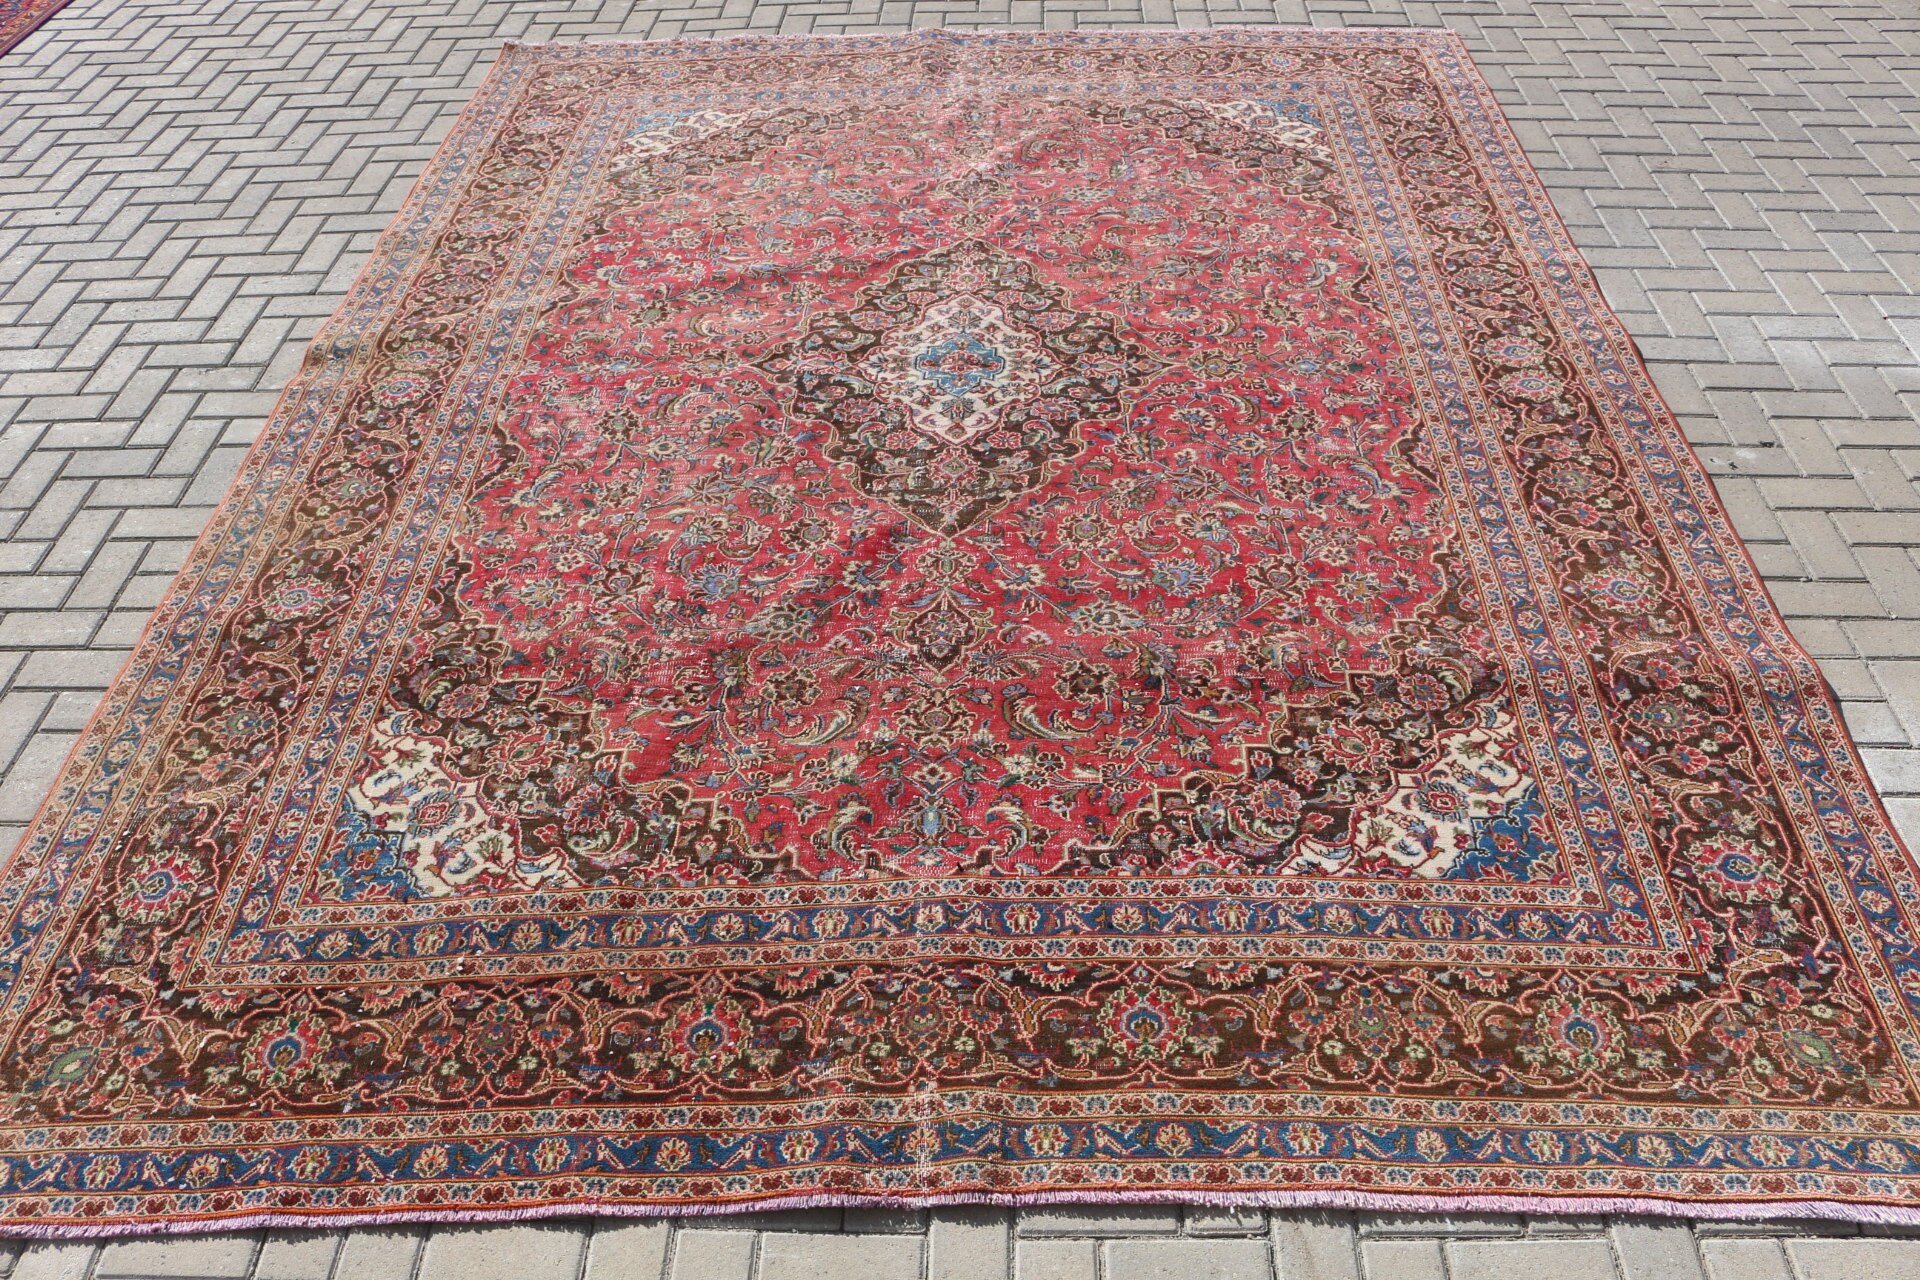 Turkish Rugs, Saloon Rugs, Vintage Rugs, Anatolian Rug, Bright Rug, Living Room Rugs, Cool Rugs, Red Moroccan Rug, 9.4x12.4 ft Oversize Rug